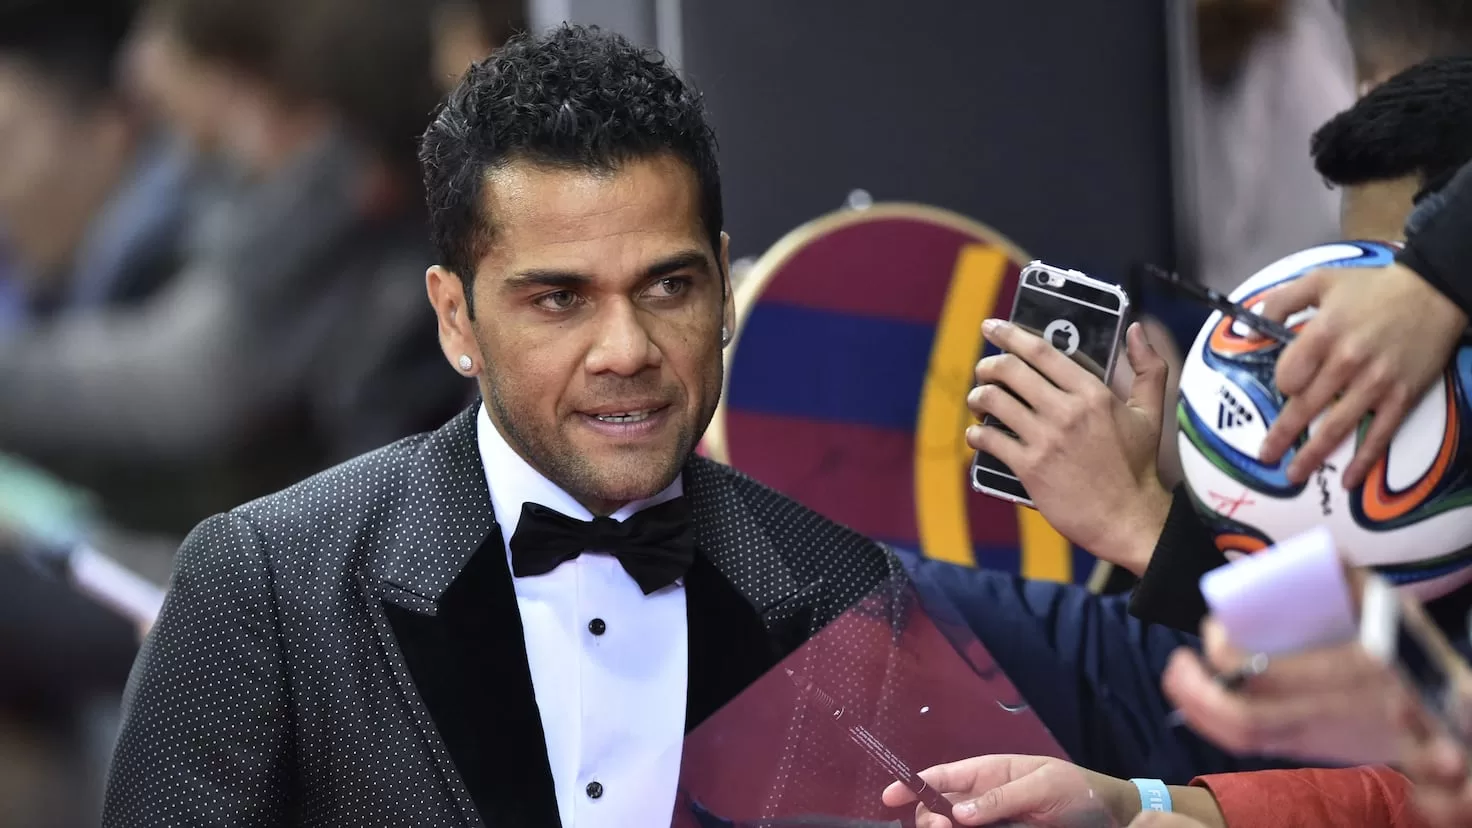 Why Dani Alves can't pay bail: this is the money he has in the bank
